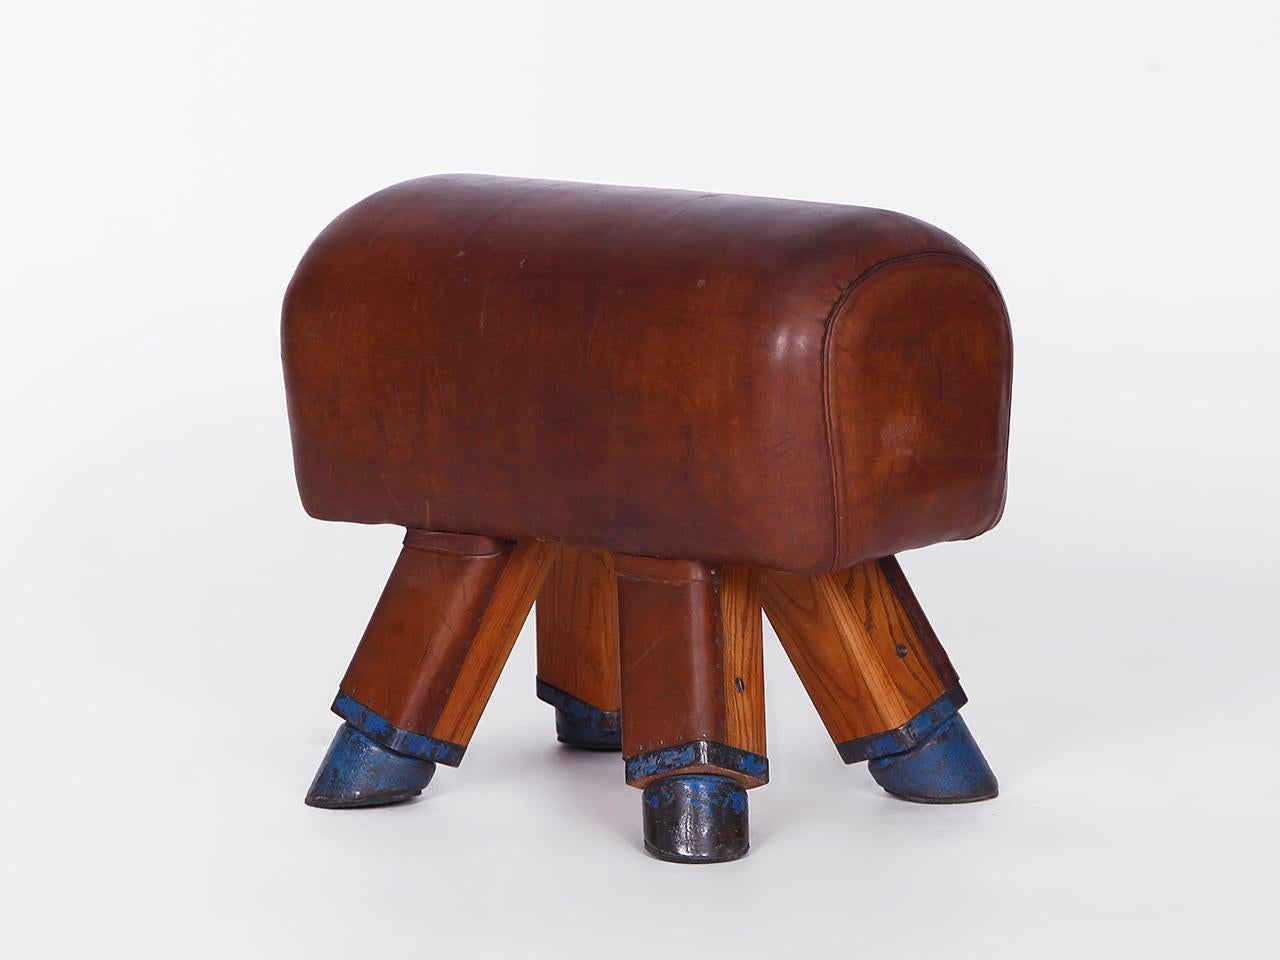 20th Century Gymnastic Vintage Czech Leather Gym Stool Bench Pommel Horse, 1930s For Sale